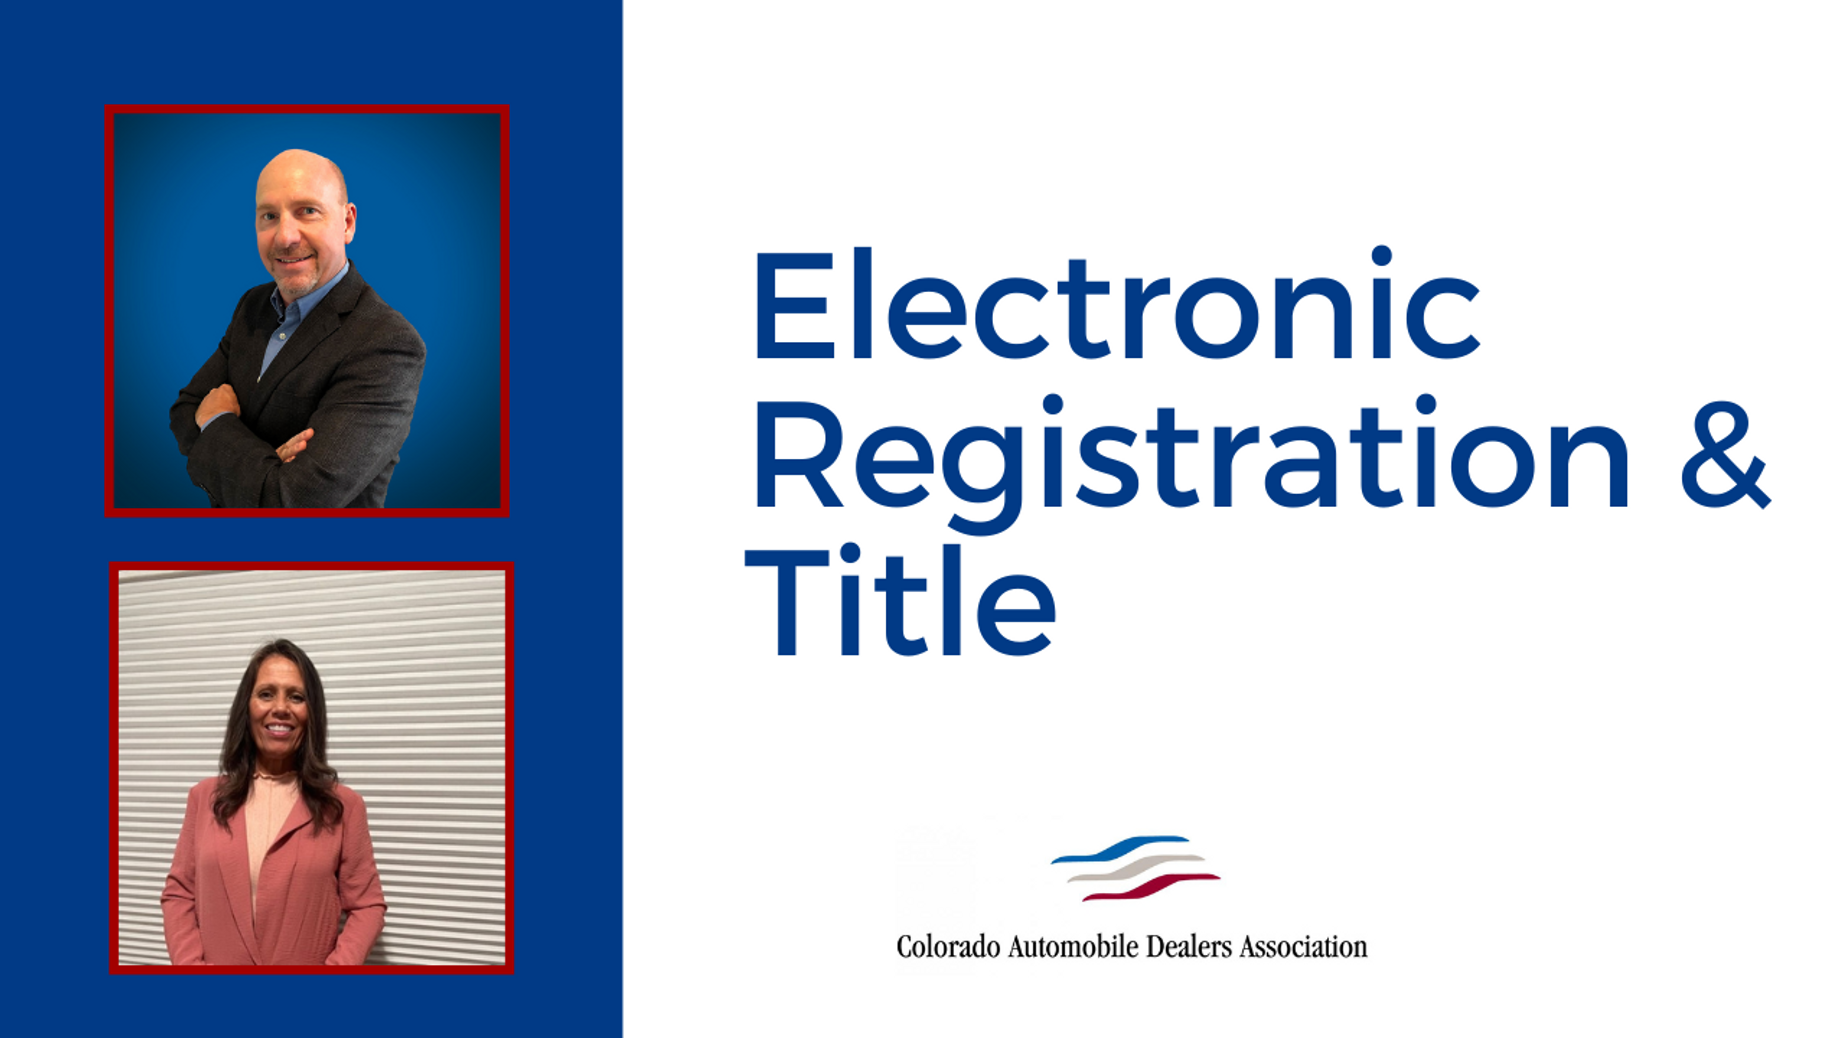 Electronic Registration & Title: How Colorado’s new system will change title processing and customer satisfaction forever